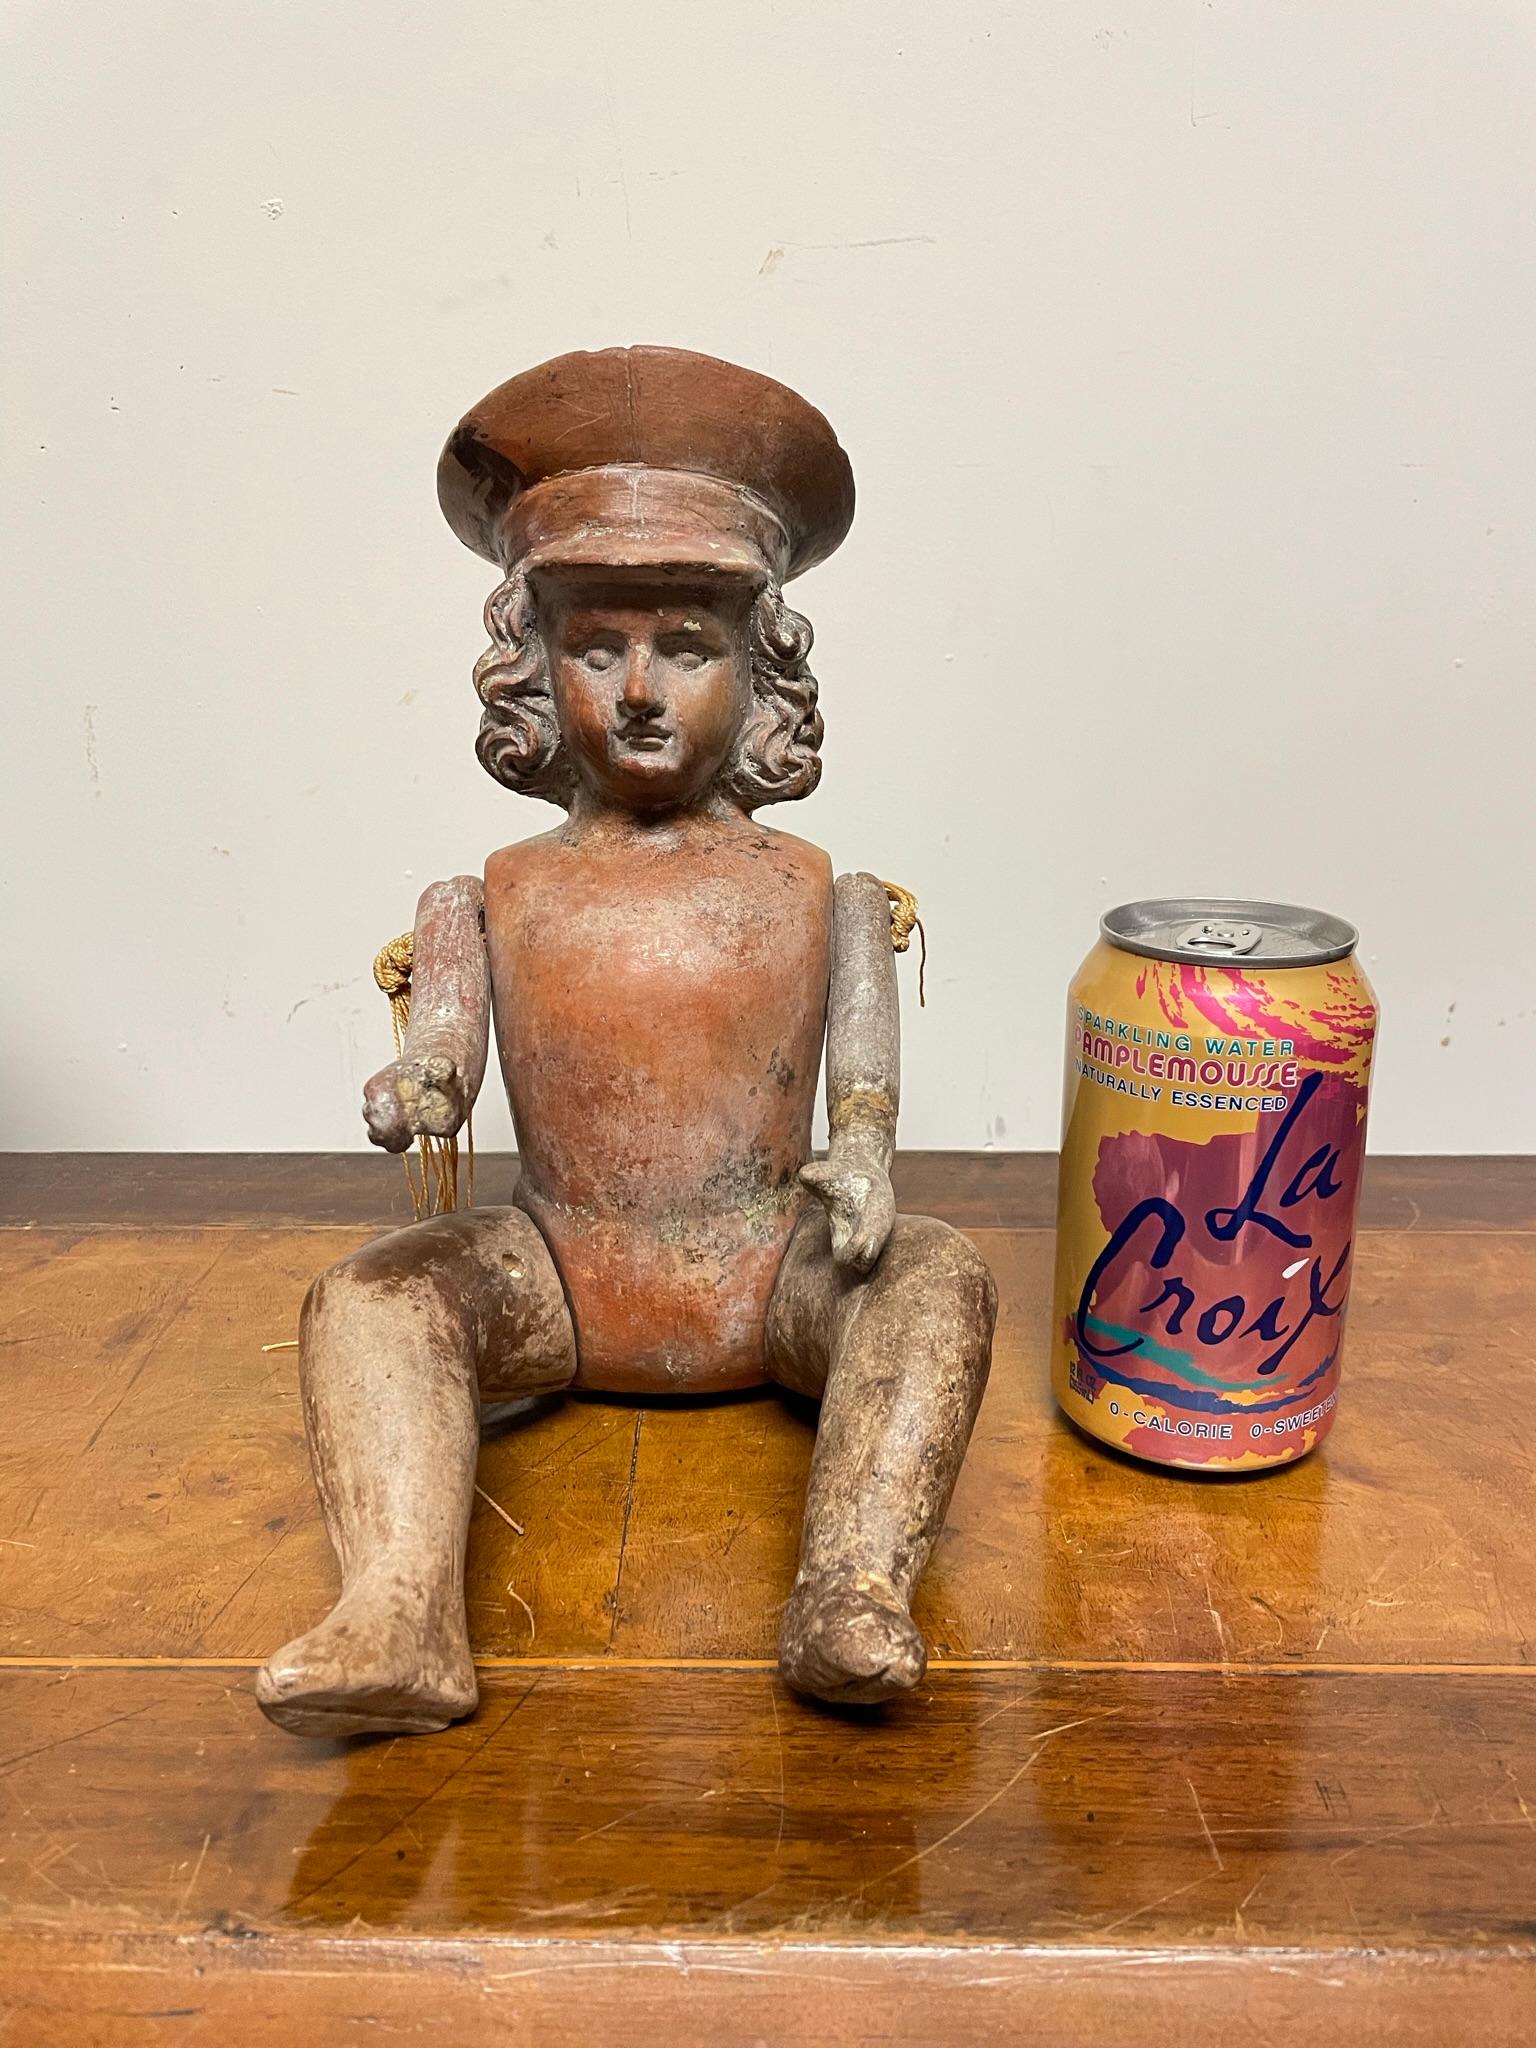 Funky and very cool Mexican terracotta doll figure with articulated limbs. Since it is solid terracotta it is likely this is a mold from which other dolls were made. As a folk art sculpture it is absolutely charming. 
The military hat gives it a